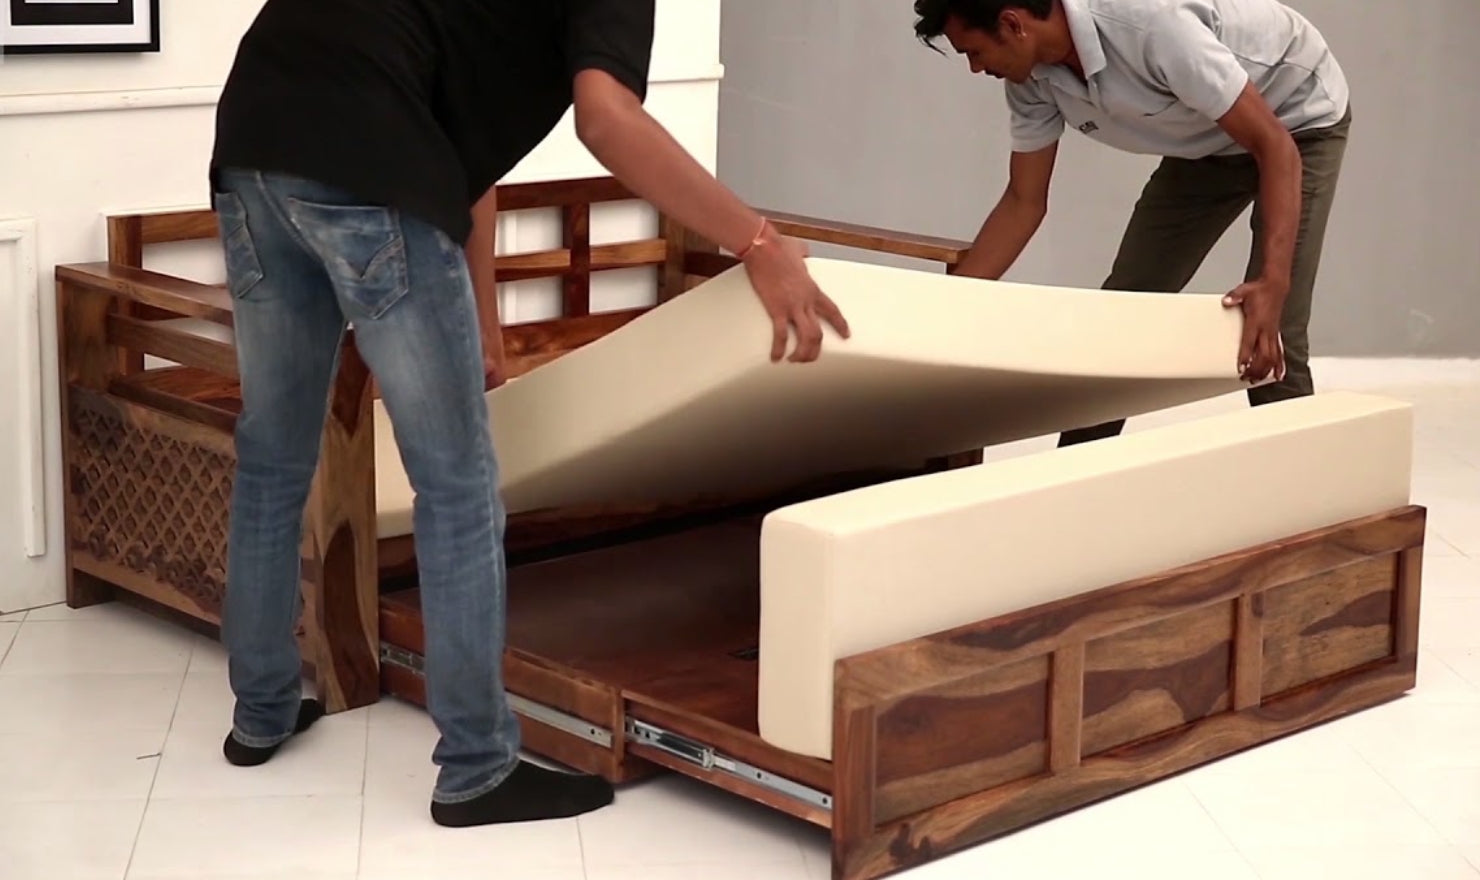 TIPS TO TAKE APART A SLEEPER SOFA FOR MOVING - Lift out the bedframe